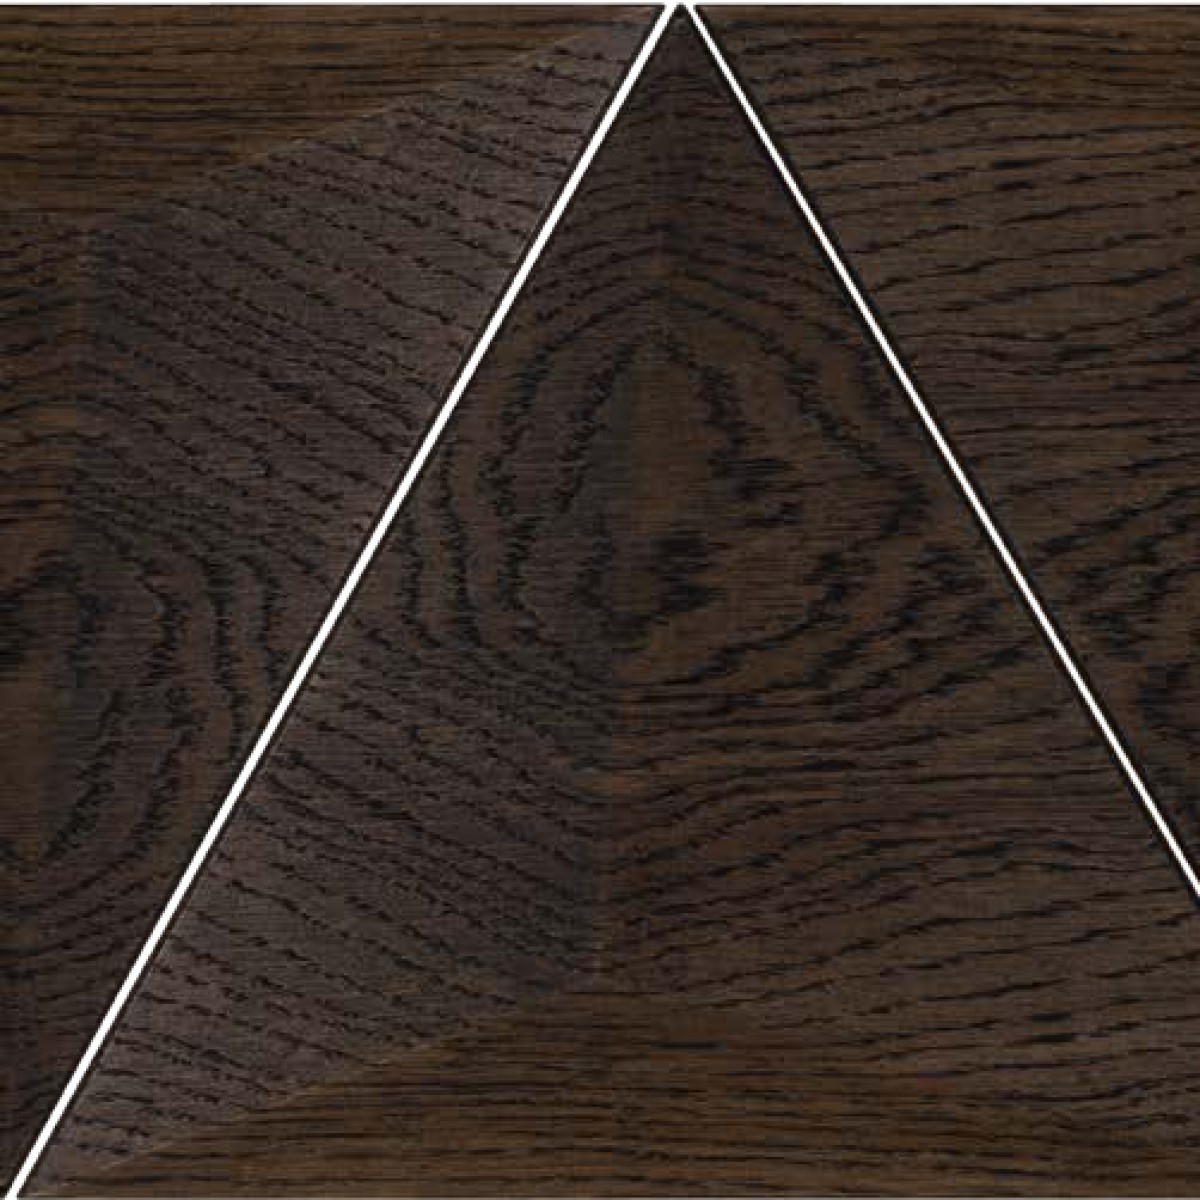 Panouri decorative din lemn FORM AT WOOD FRM-F02, material: